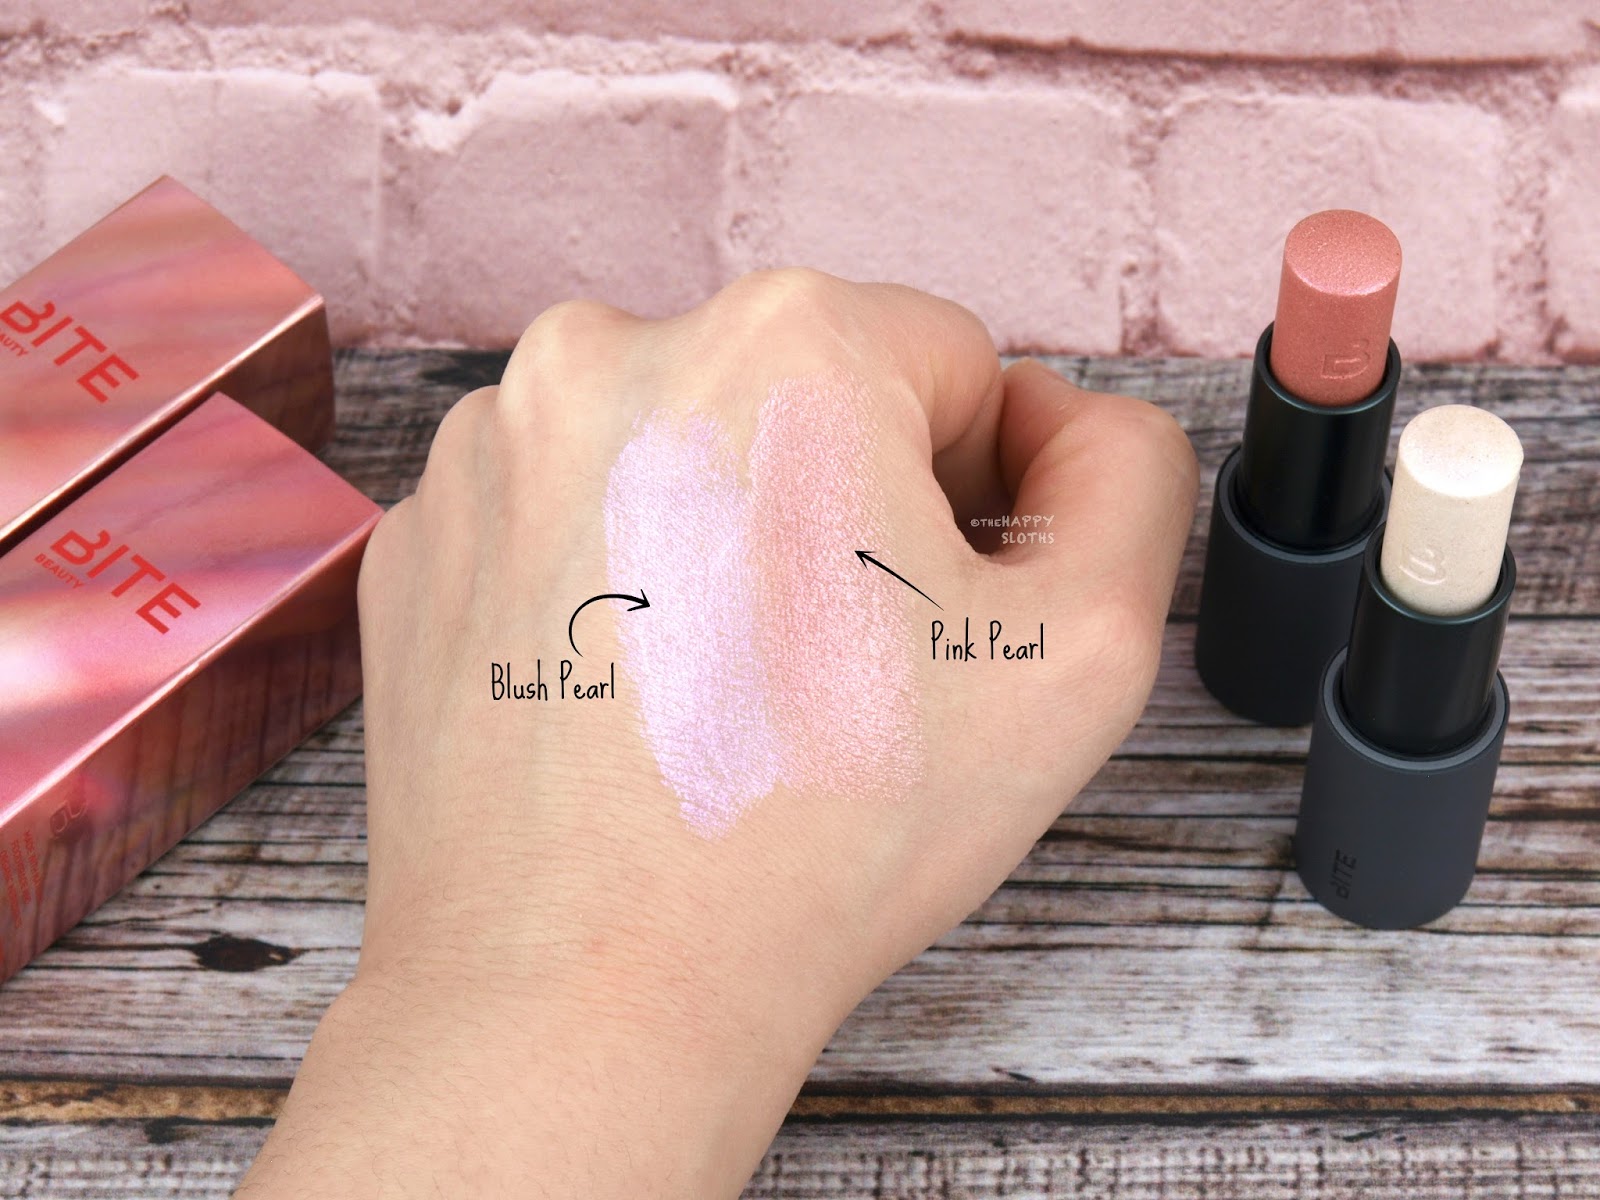 Bite Beauty | Prismatic Pearl Multistick in "Blush Pearl" & "Pink Pearl": Review and Swatches